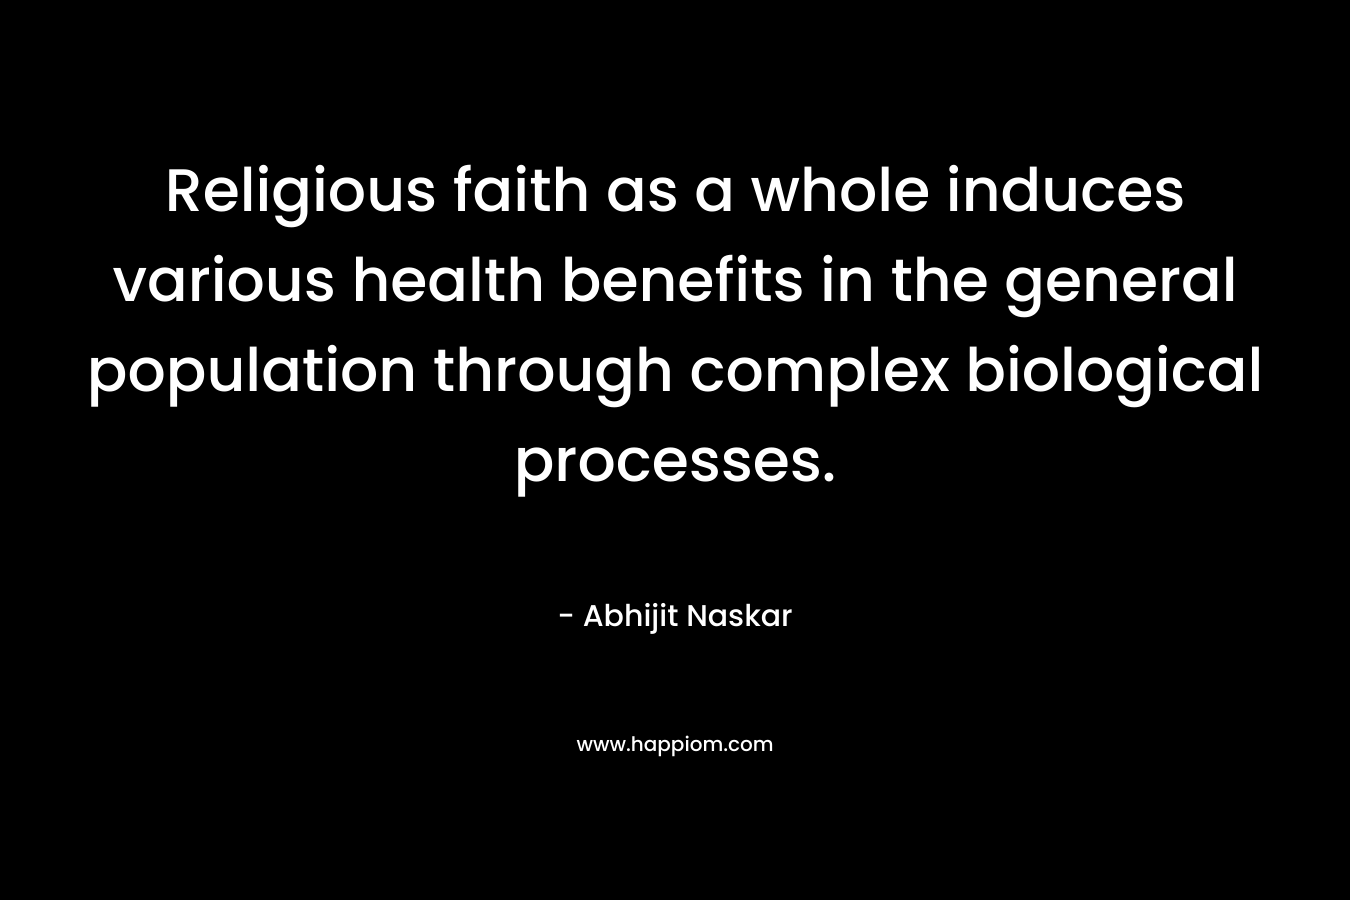 Religious faith as a whole induces various health benefits in the general population through complex biological processes.